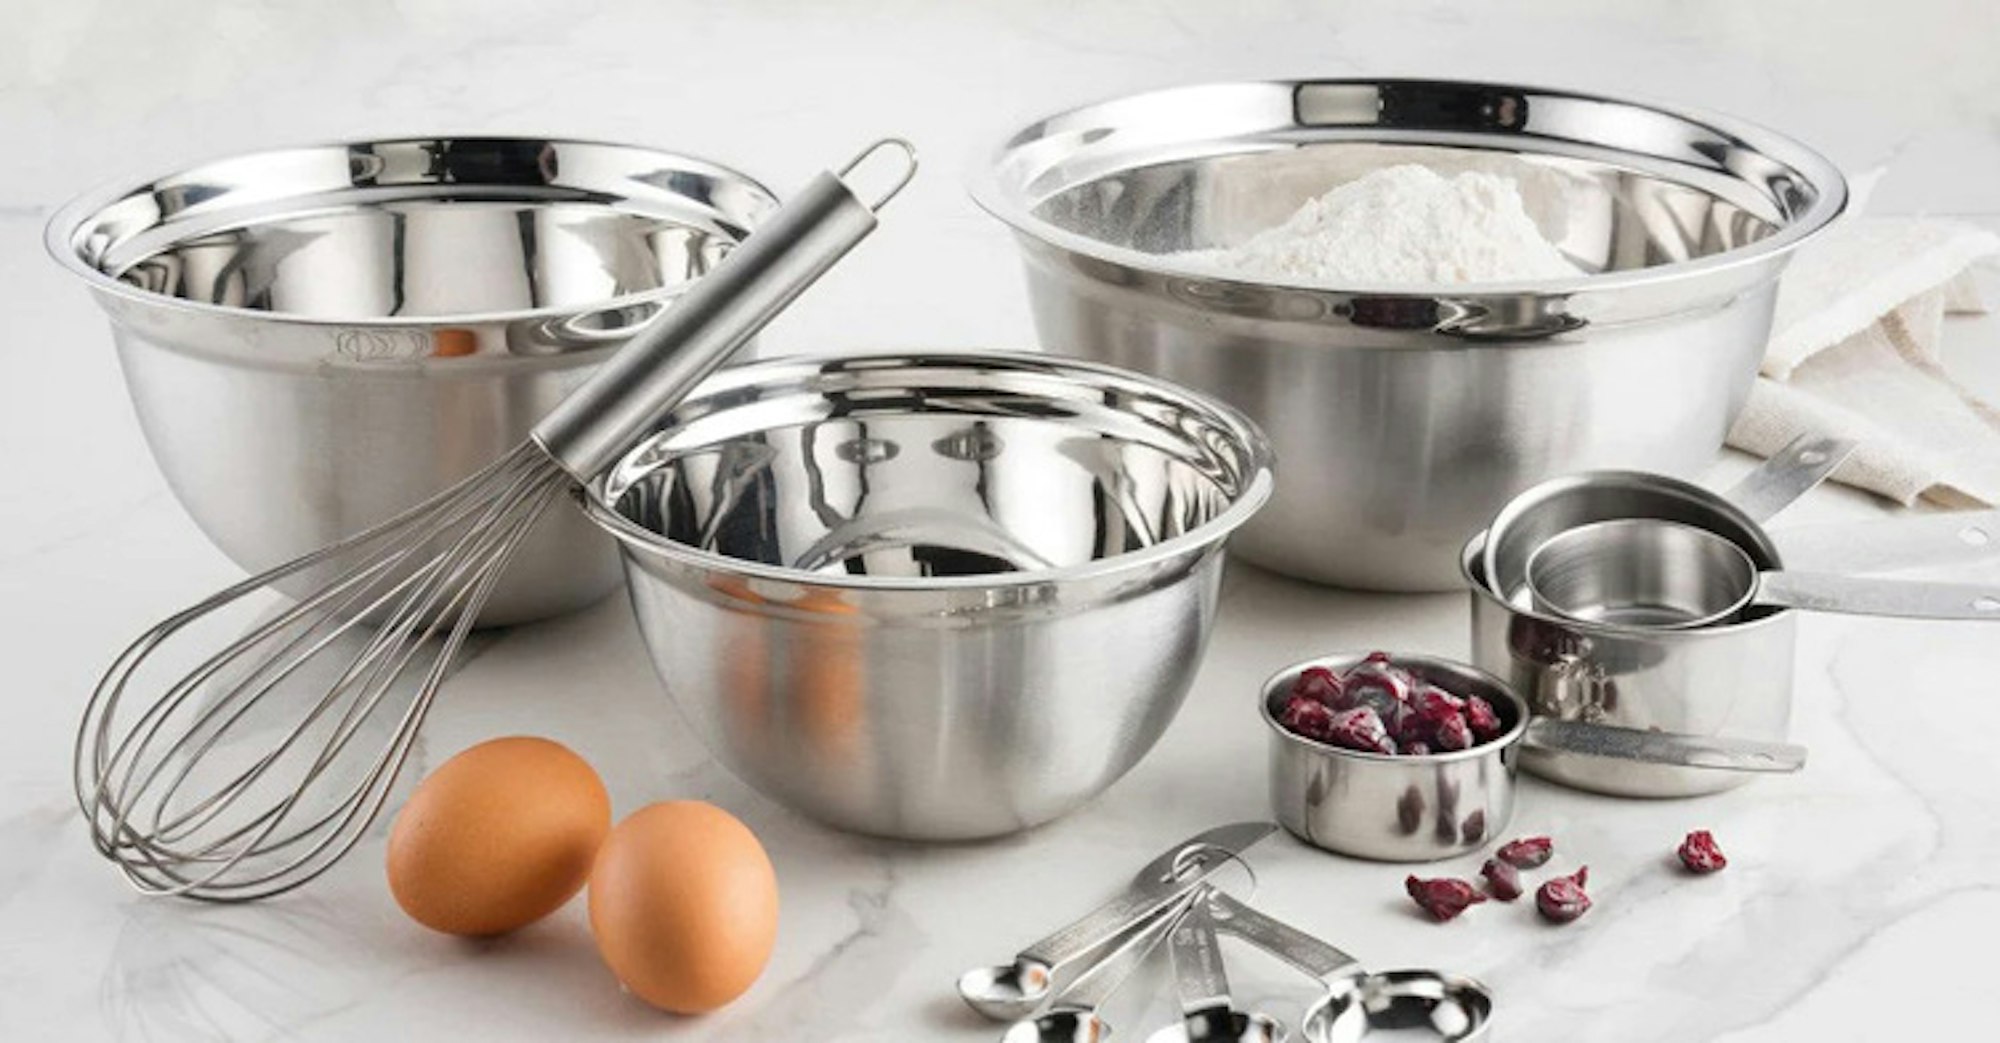 high-quality bakeware, cookware, and kitchenware products